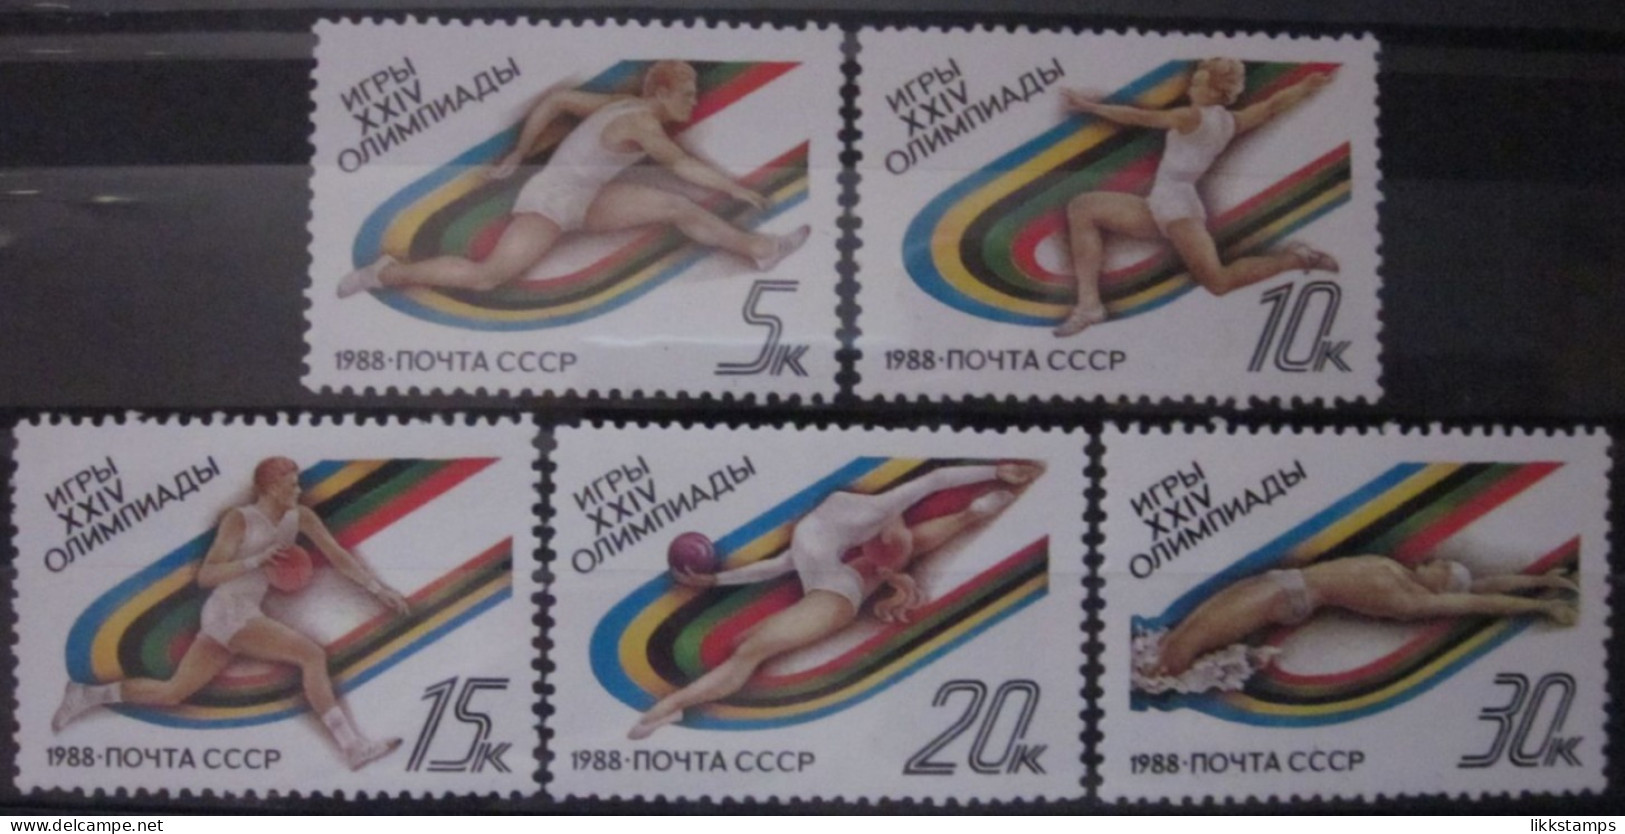 RUSSIA ~ 1988 ~ S.G. NUMBERS 5885 - 5889, OLYMPIC GAMES. ~ MNH #03654 - Unused Stamps